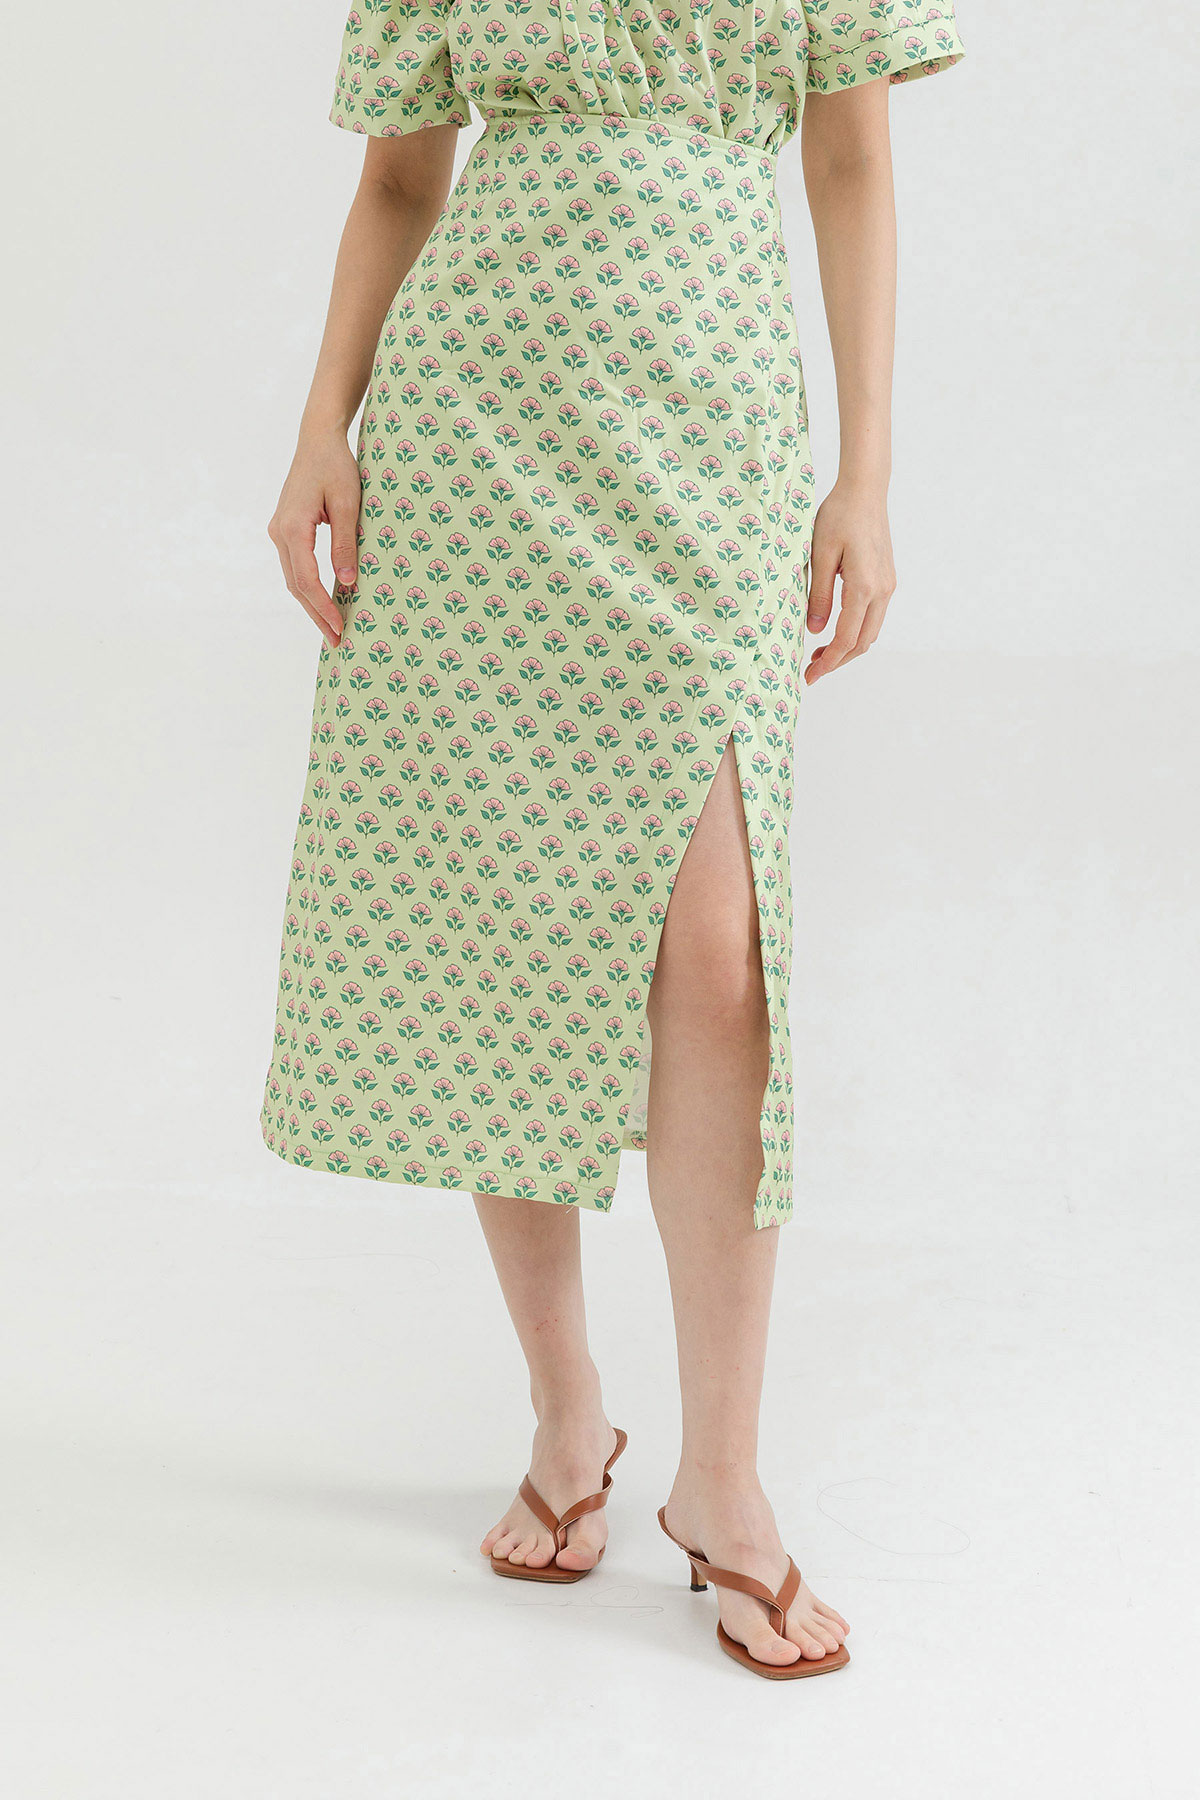 *SALE* CLAUDIA SKIRT - WETHERSFIELD [BY MODPARADE]